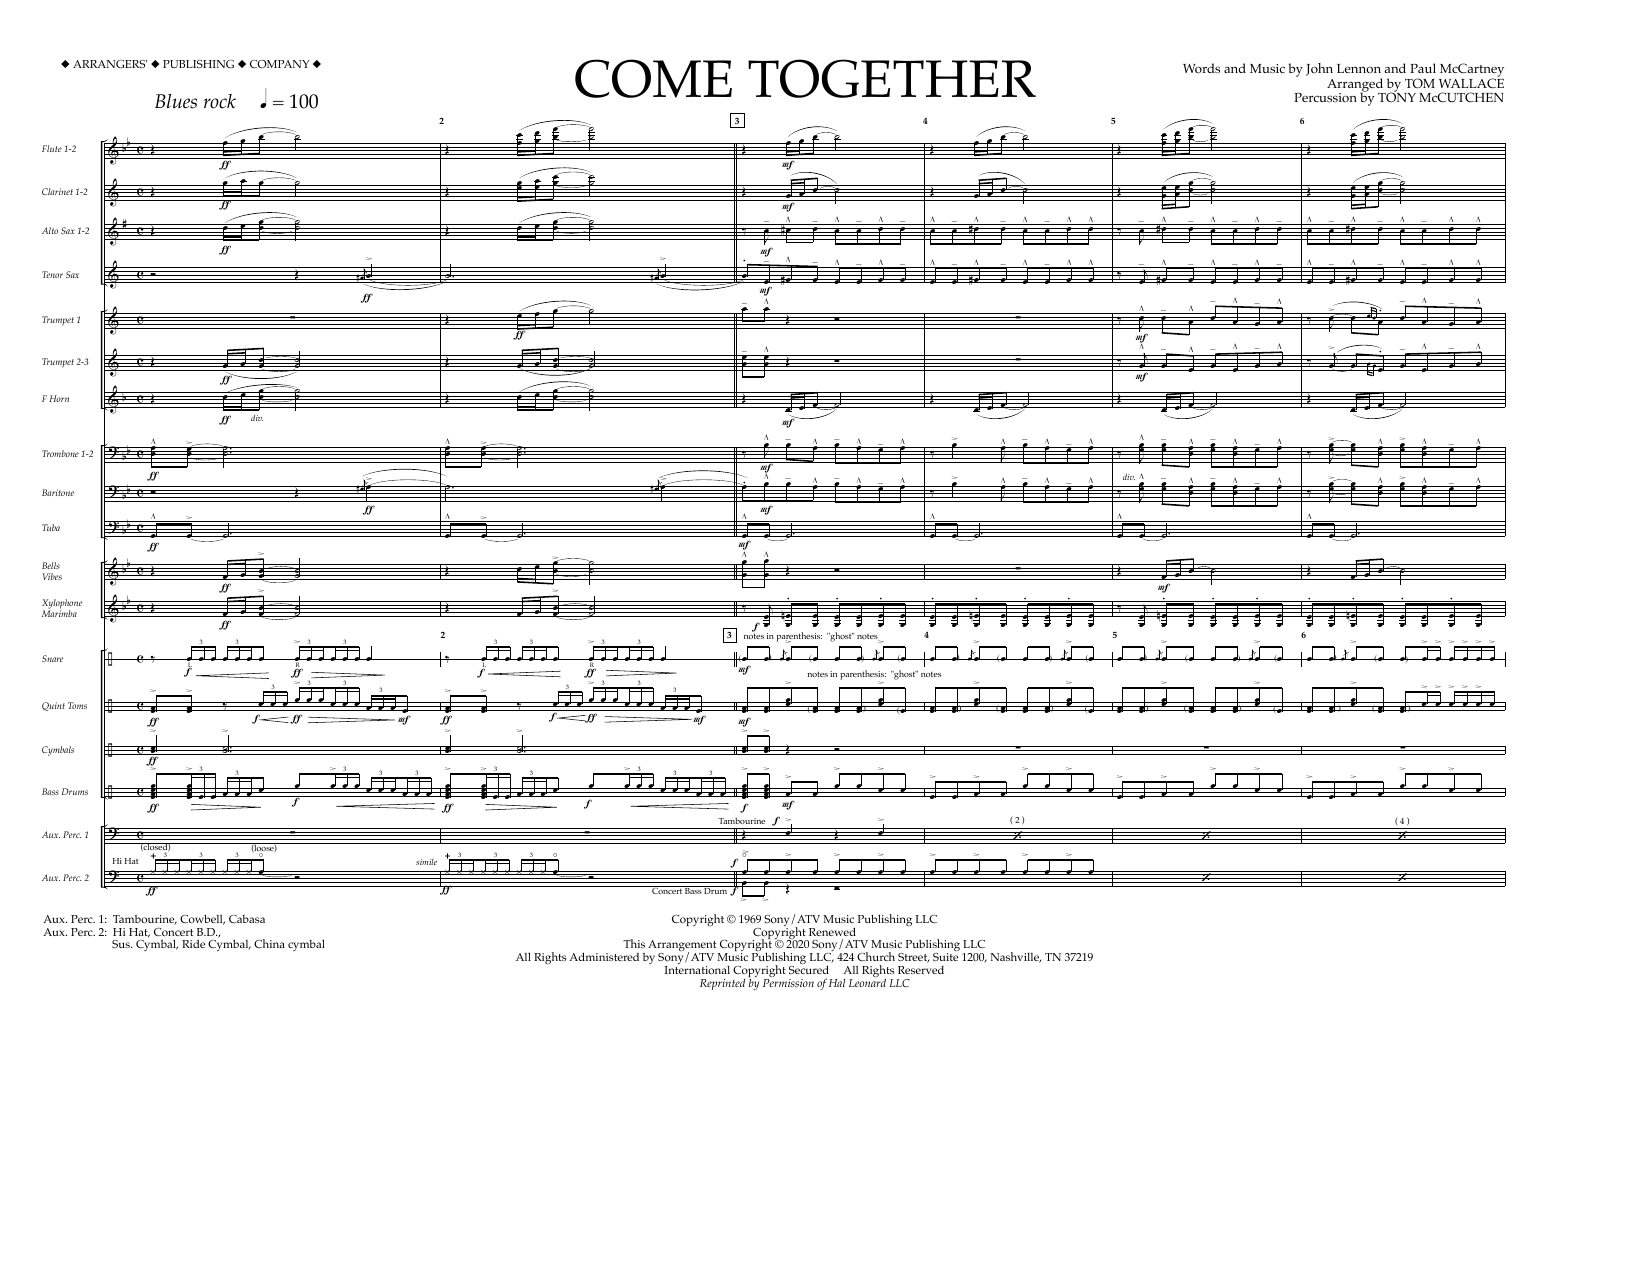 Download The Beatles Come Together (arr. Tom Wallace) - Full Sheet Music